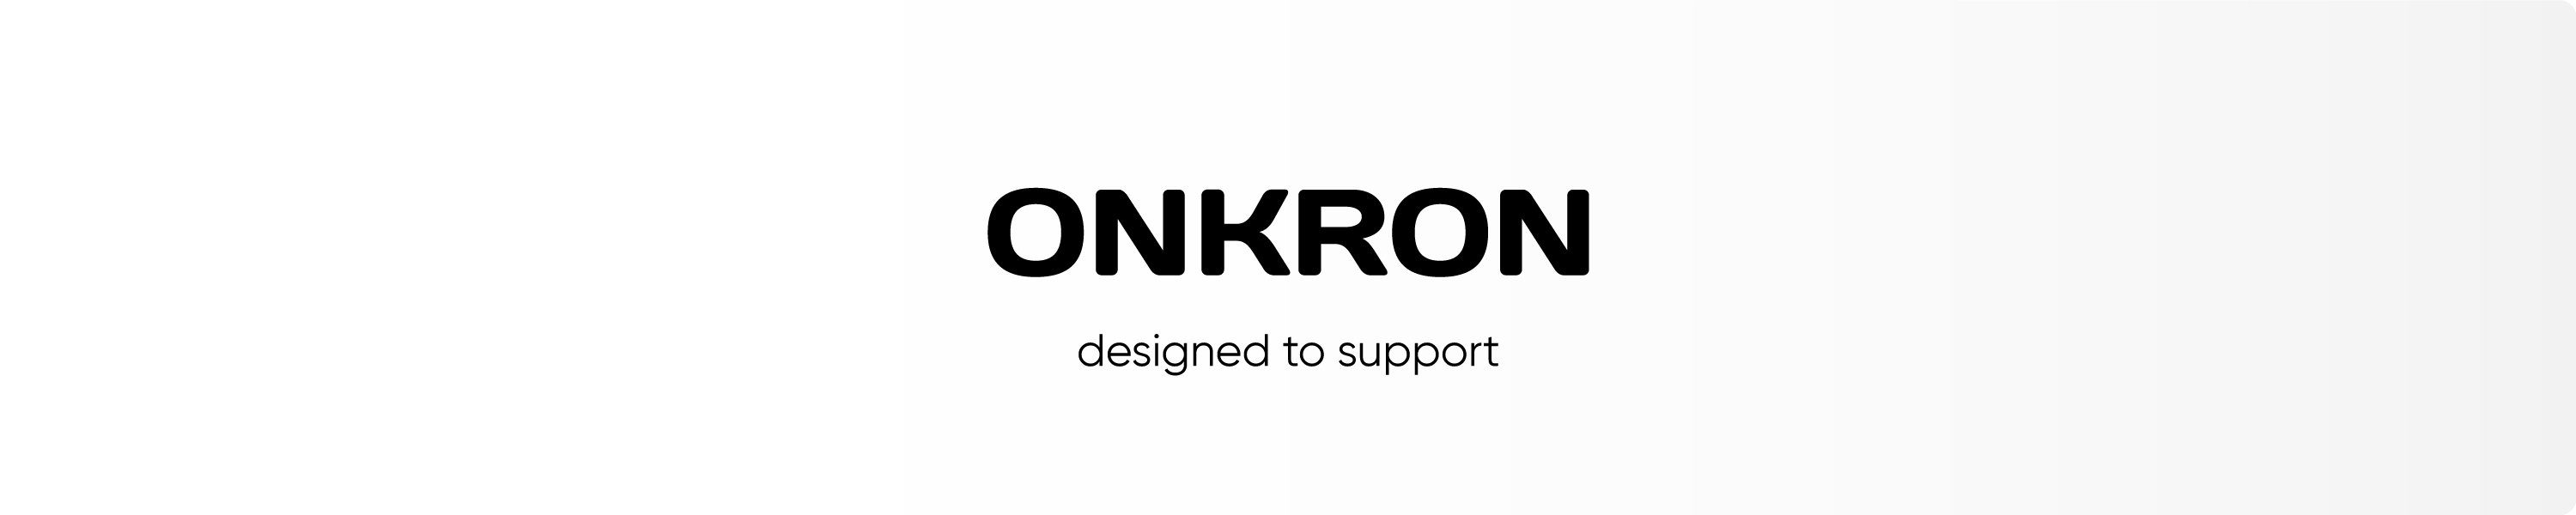 ONKRON designed to support